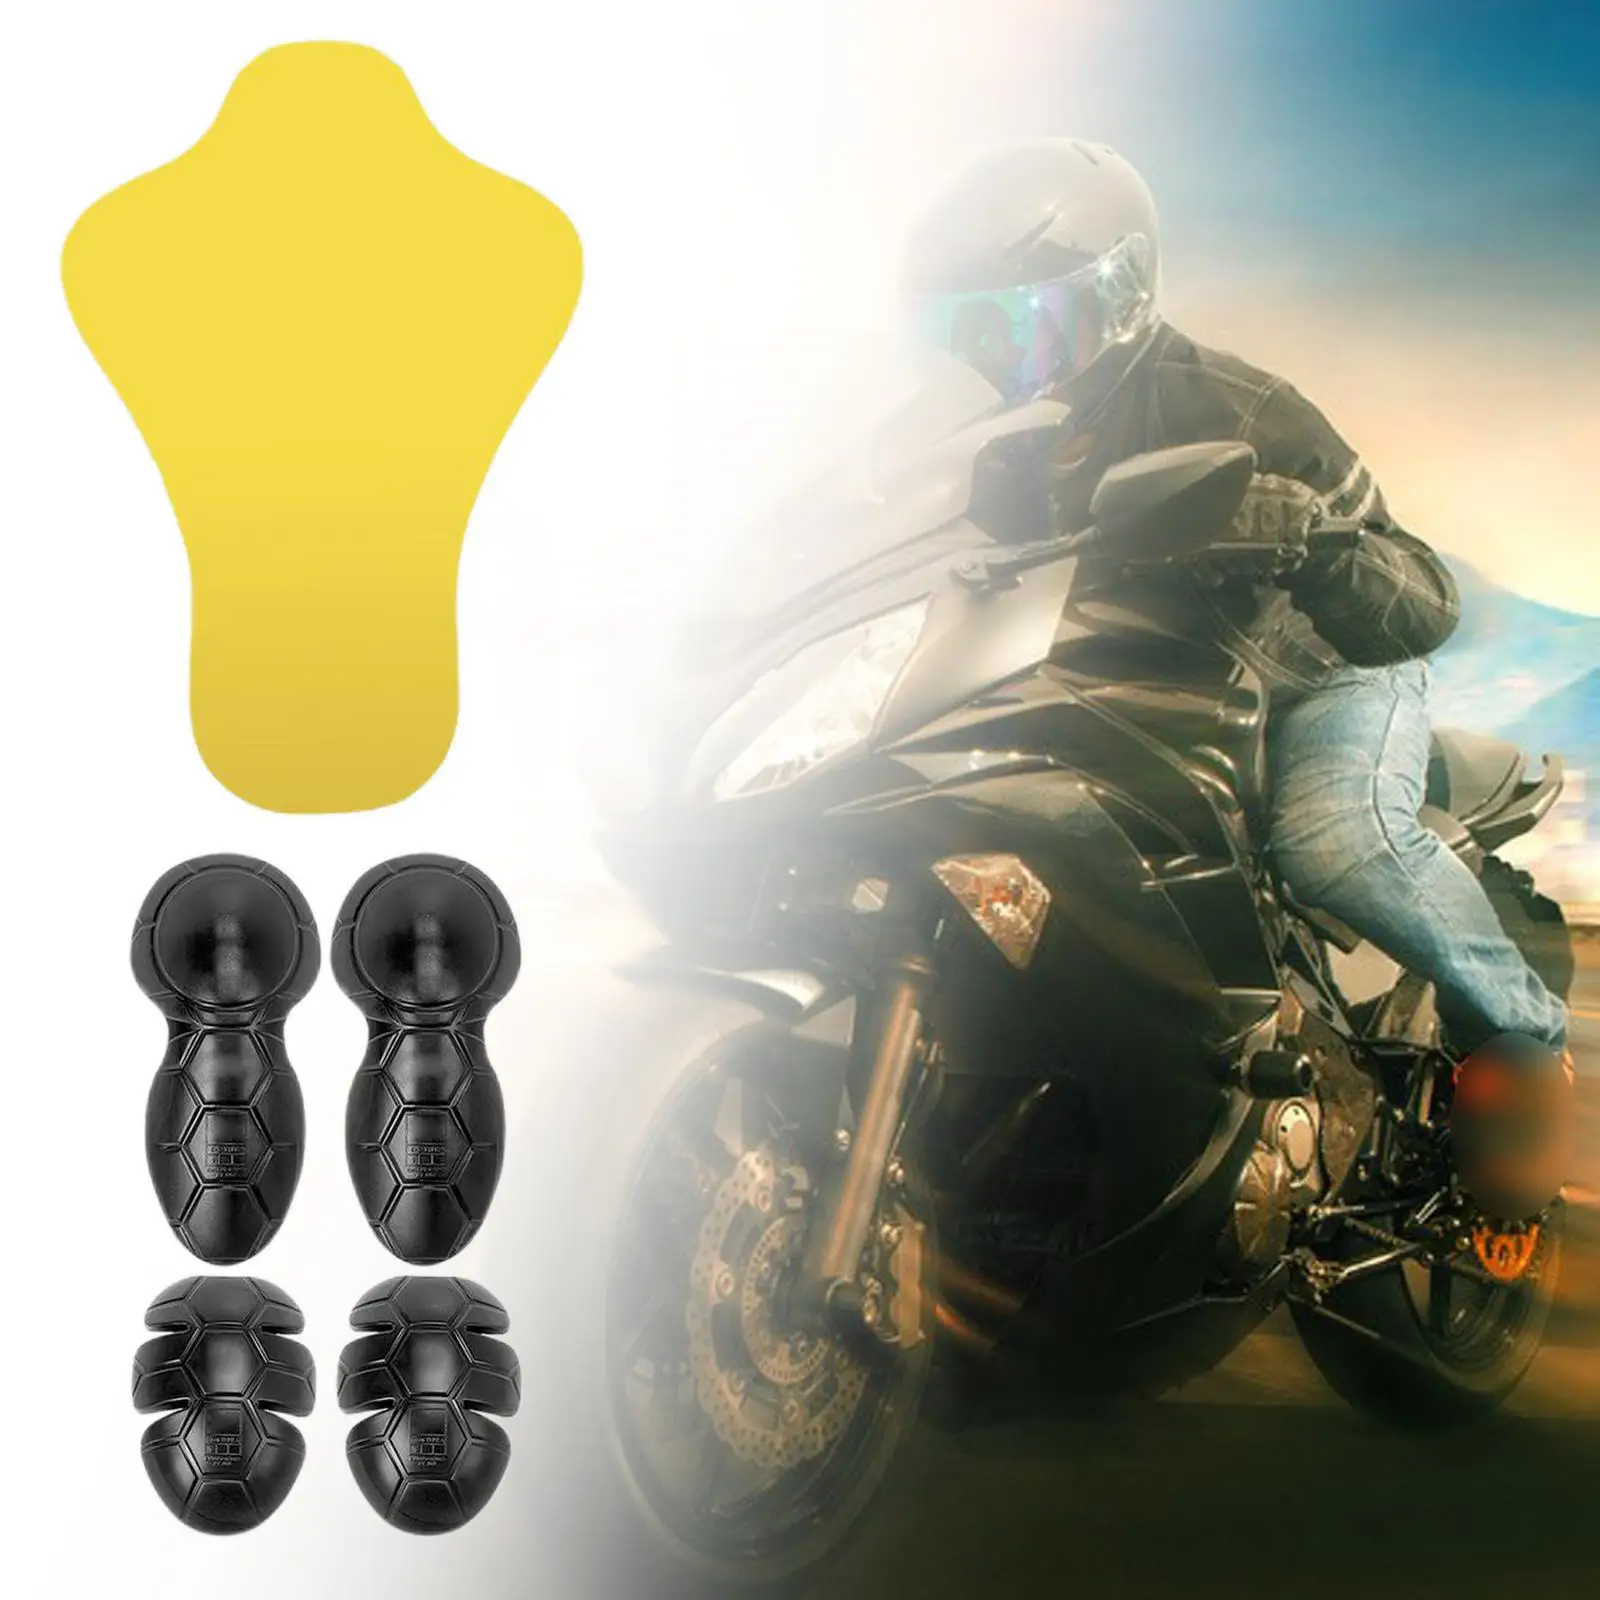 5Pcs Motorcycle Armor Protective Inside Gear Back Elbow Shoulder Universal